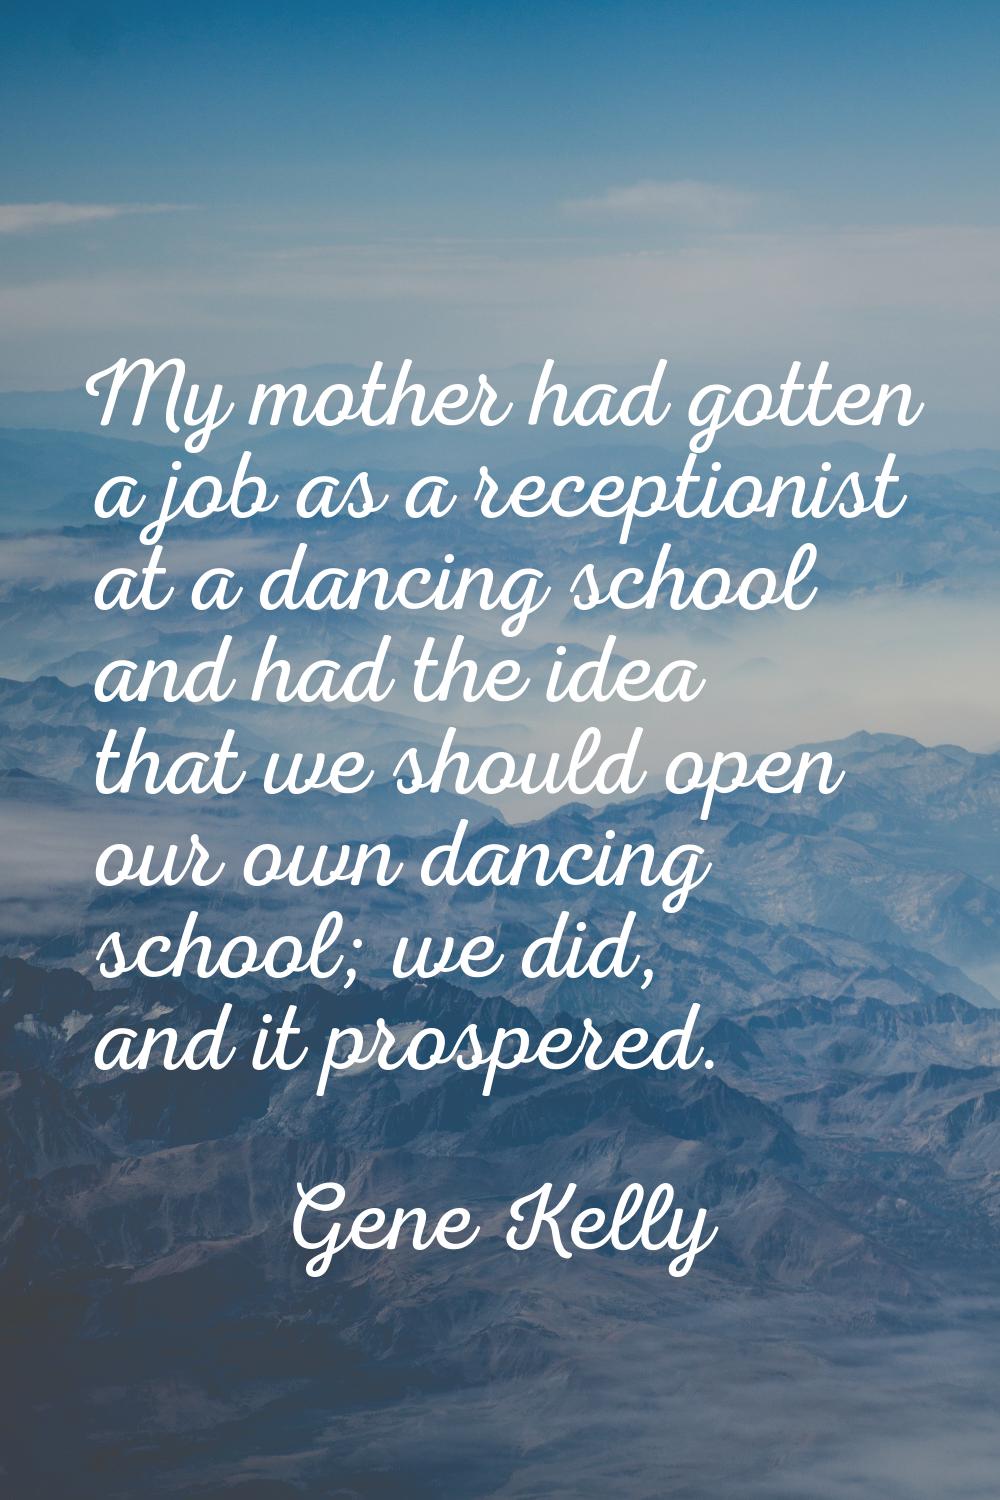 My mother had gotten a job as a receptionist at a dancing school and had the idea that we should op